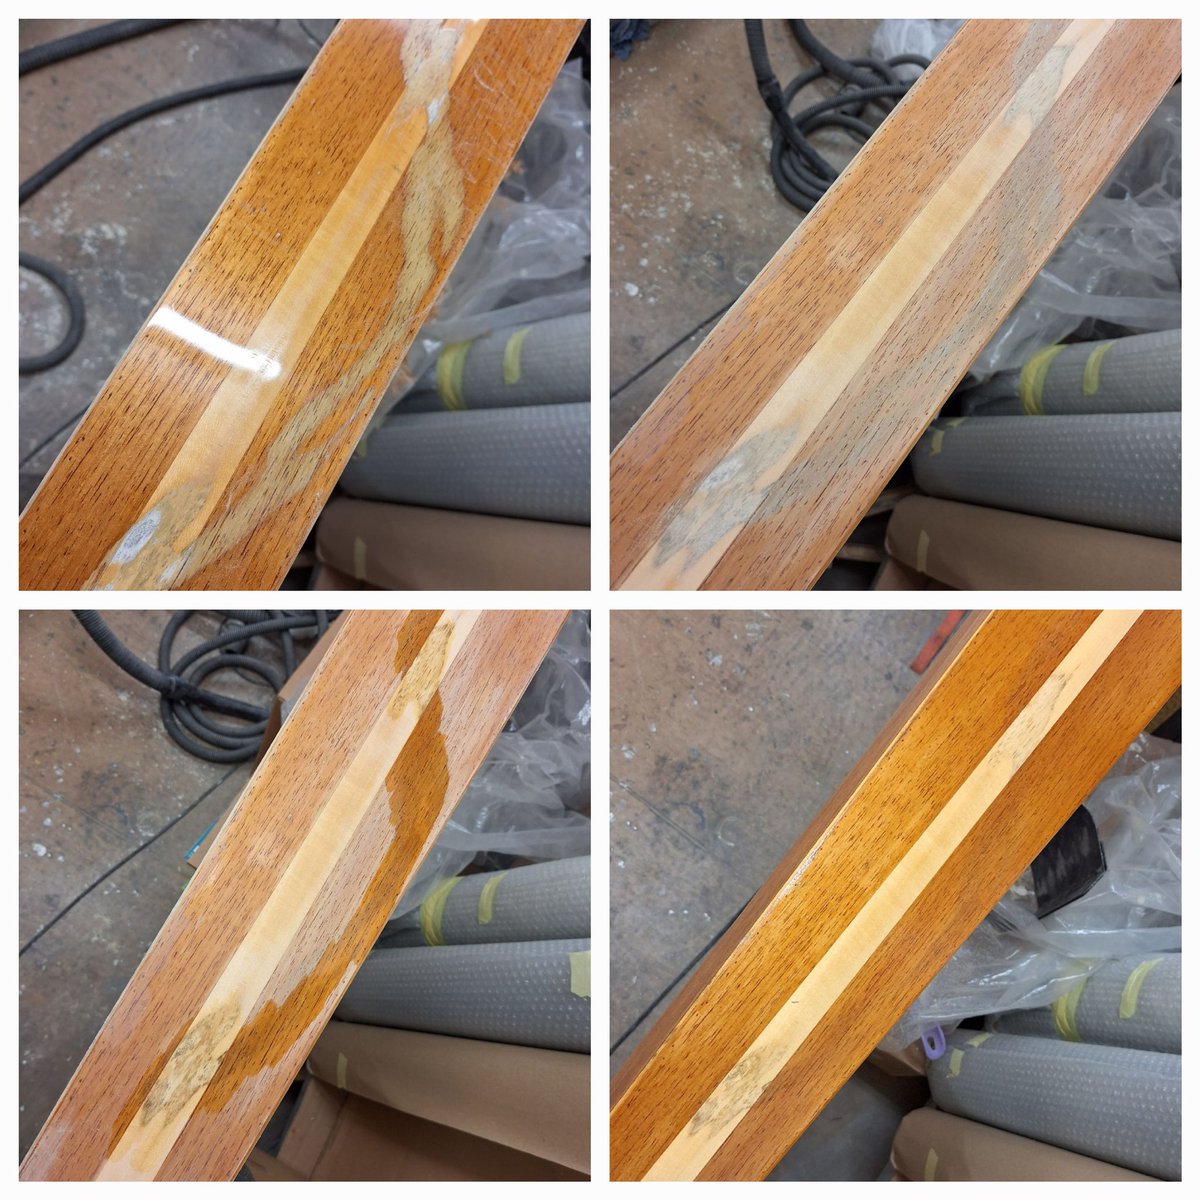 When trying to repair water damage it is rare to be able to make it perfect, but this is a huge improvement. Strip old varnish, sand, wood bleach, new coating